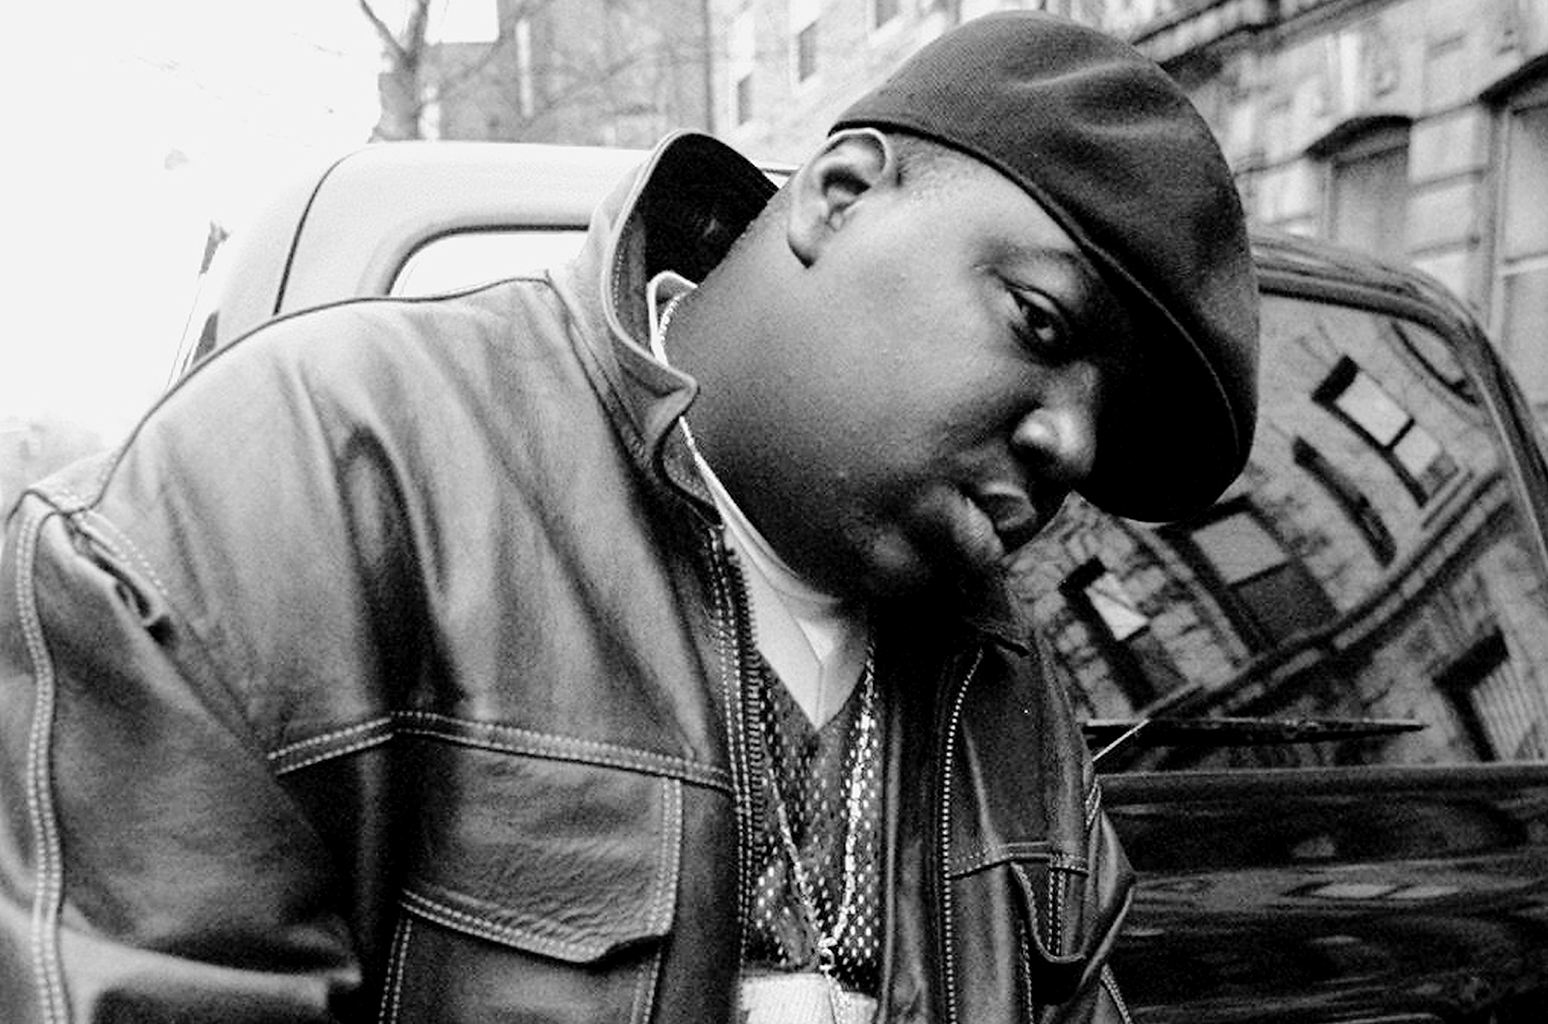 Christopher Wallace, aka The Notorious B.I.G.